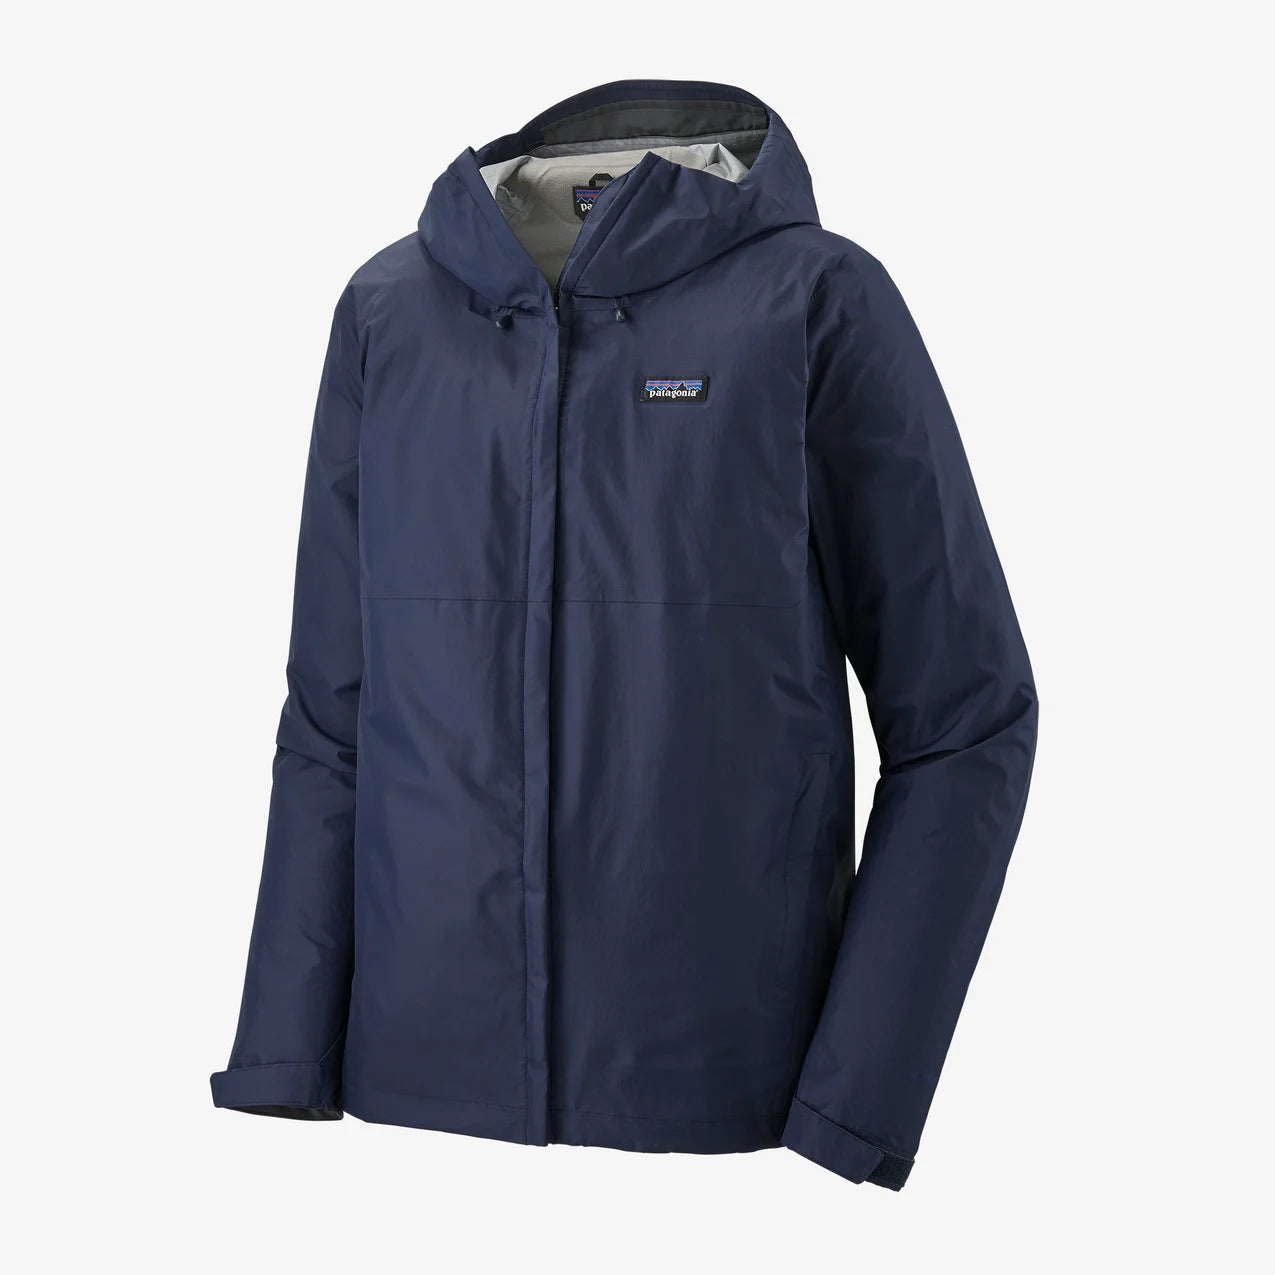 Pared-down and packable, the Torrentshell Jacket is an H2No® Performance Standard 2.5-layer nylon waterproof/breathable hard shell for seriously wet weather.